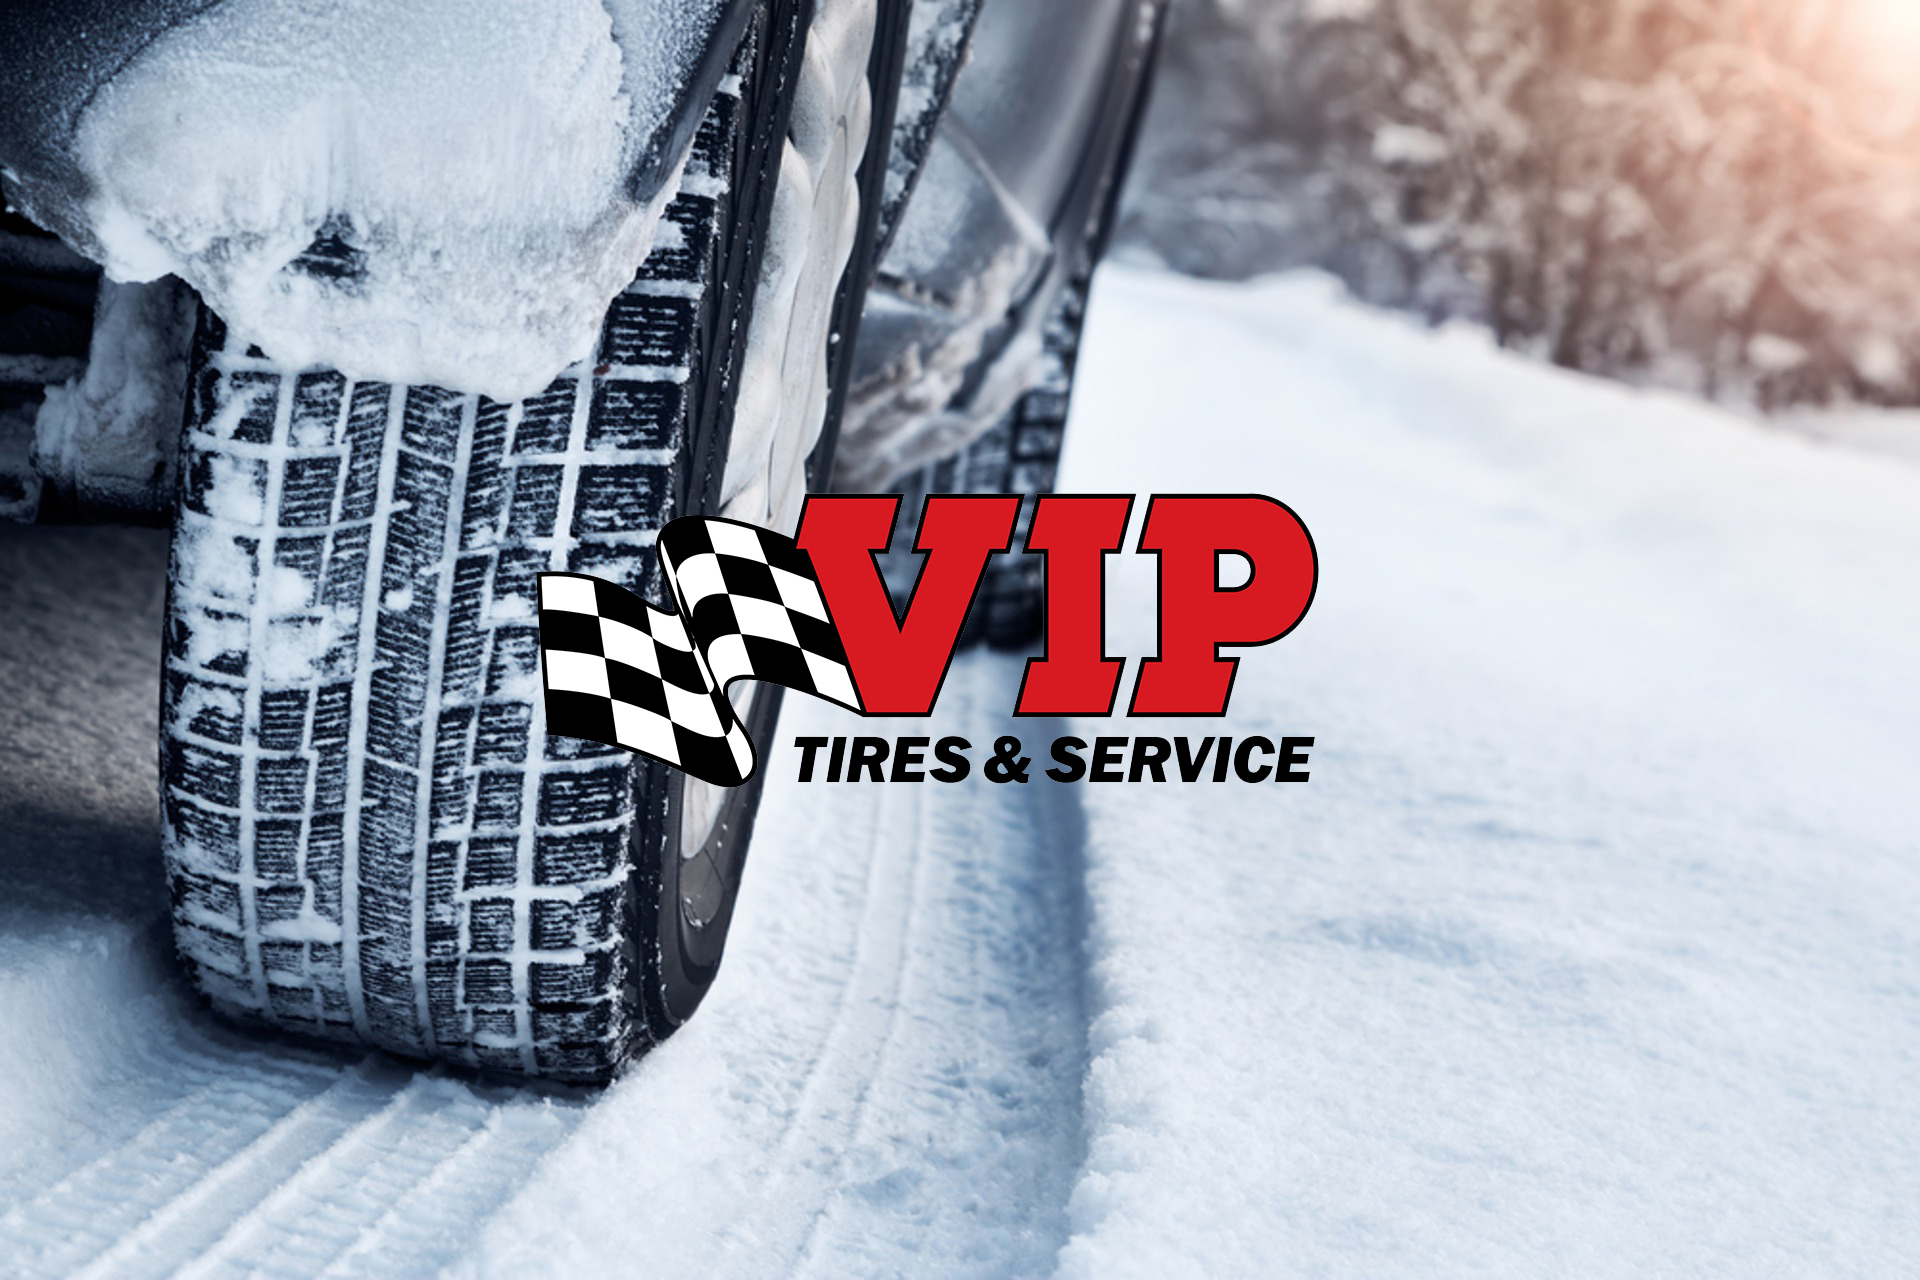 Win a VIP Tires & Service Oil Change Plus Qualify For a New Set of Tires!